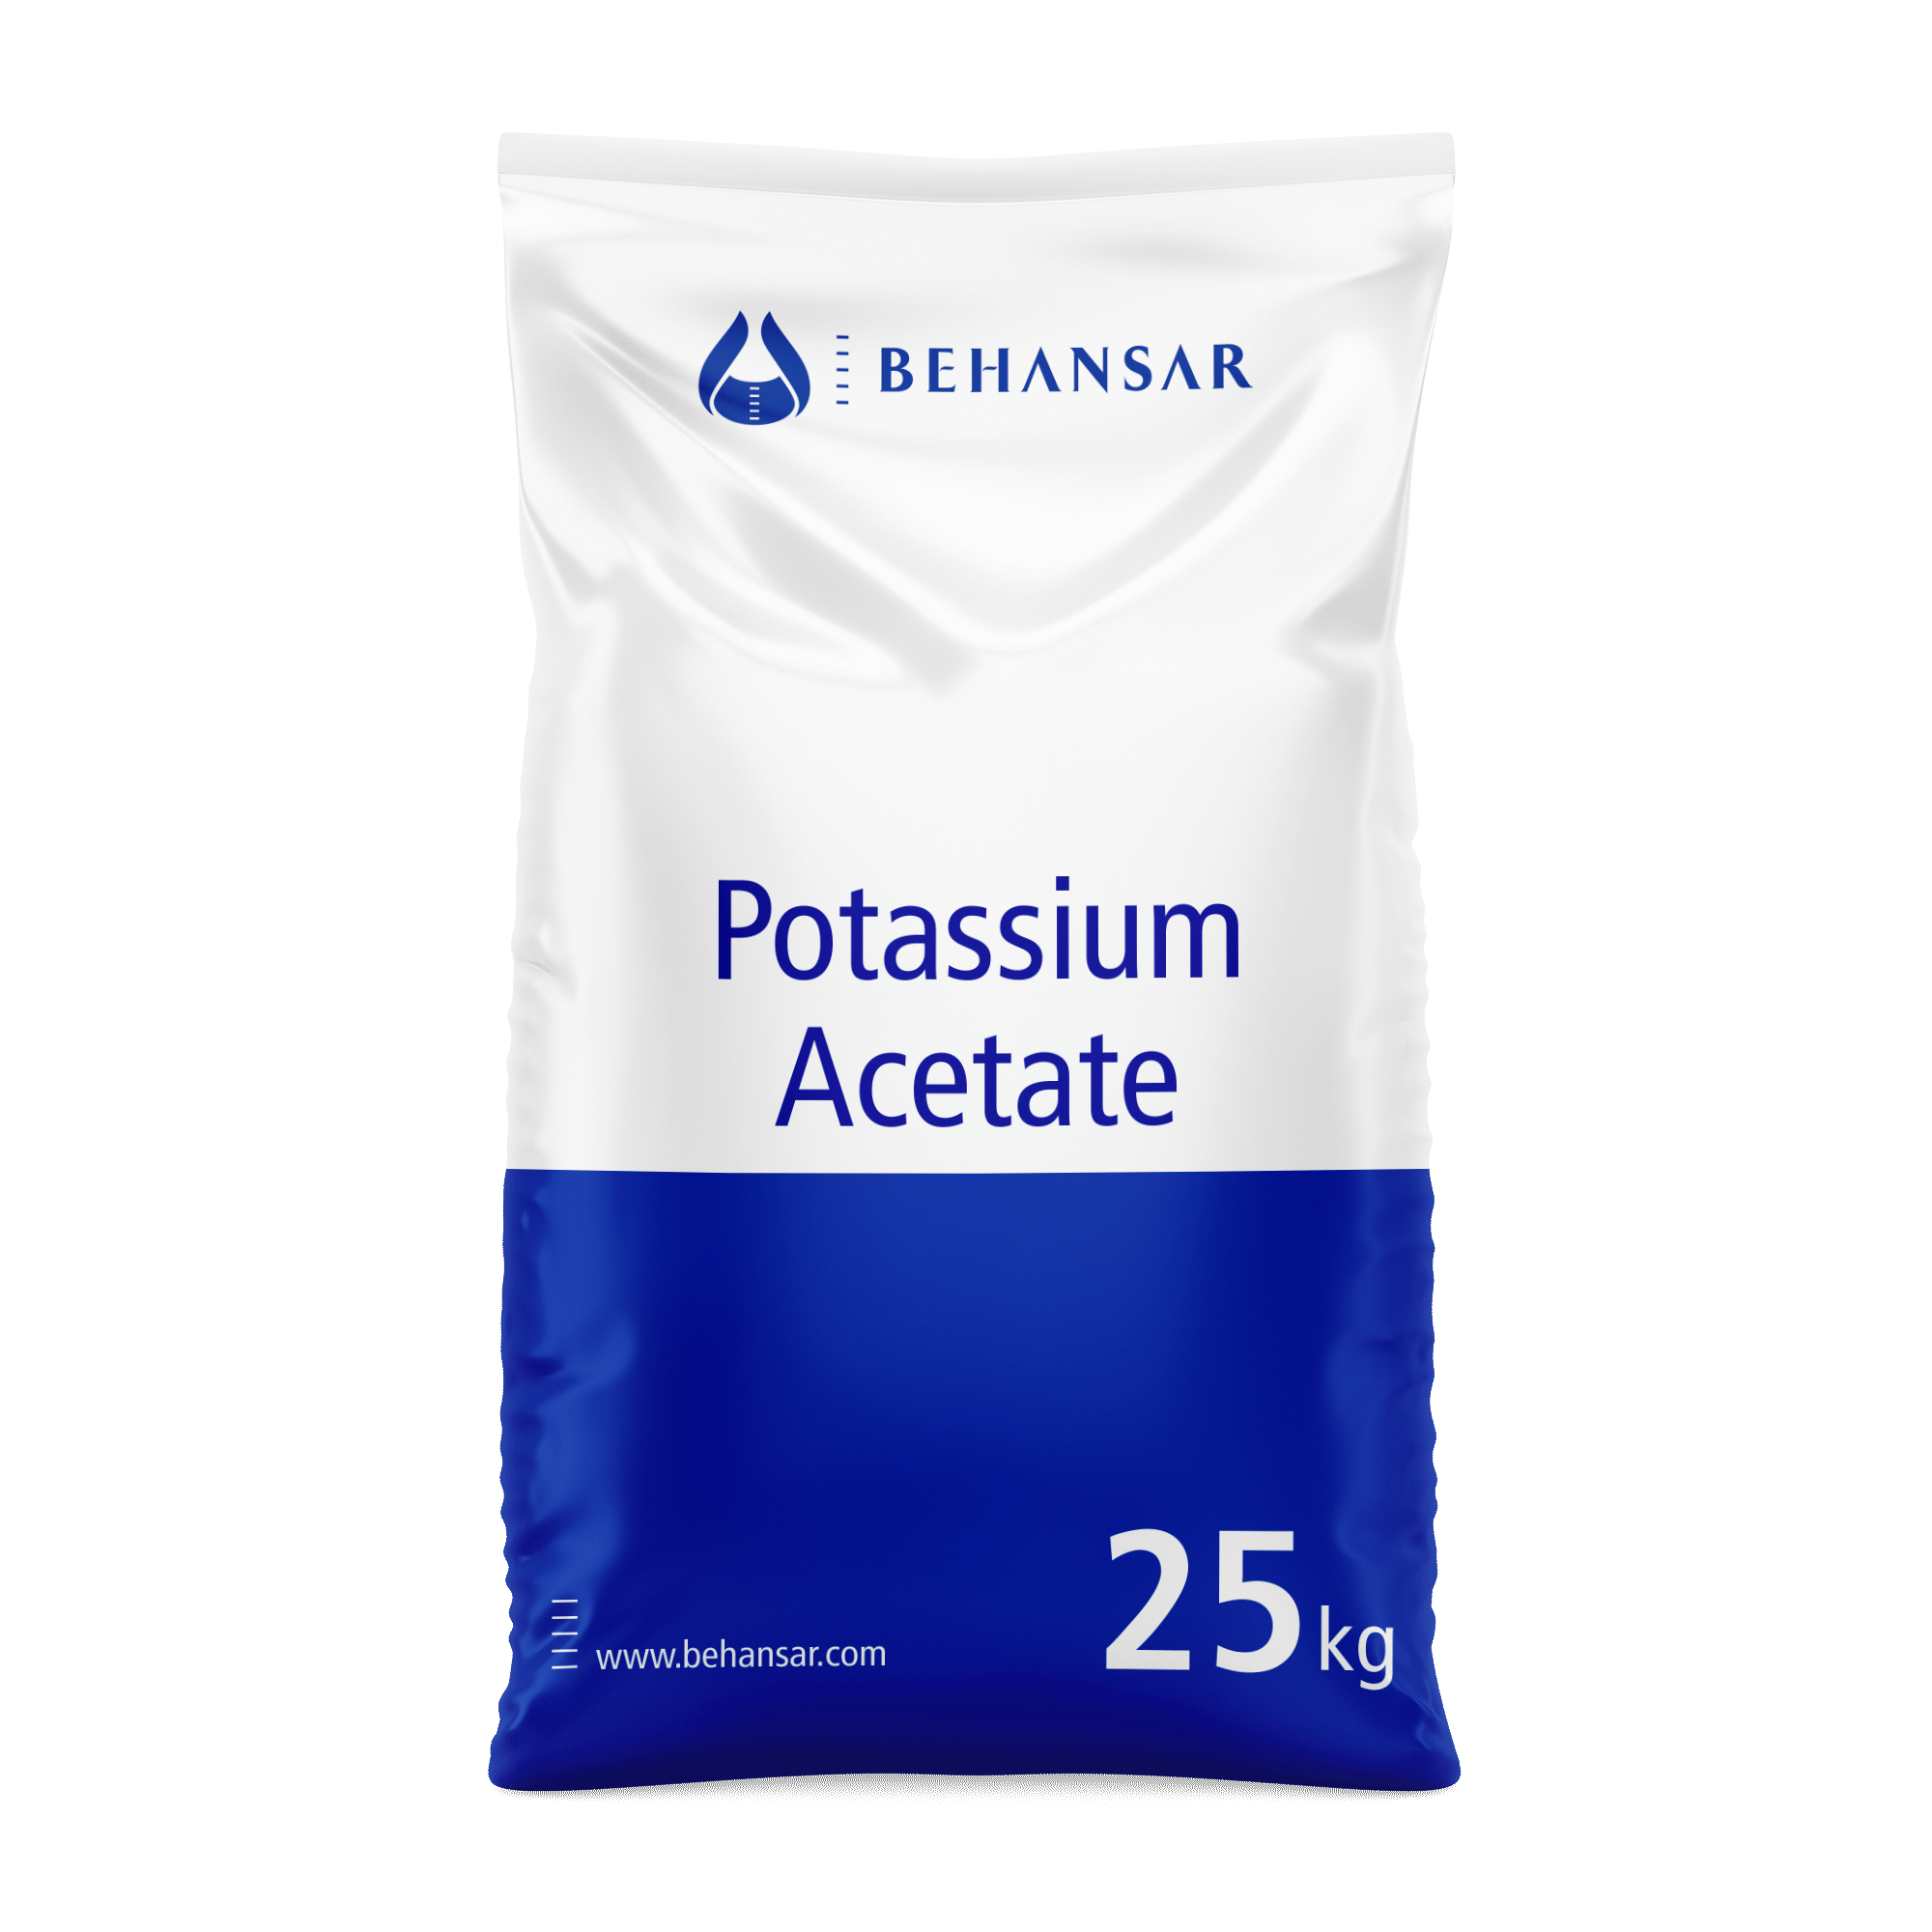 Potassium Acetate is one of the products of Behansar Co